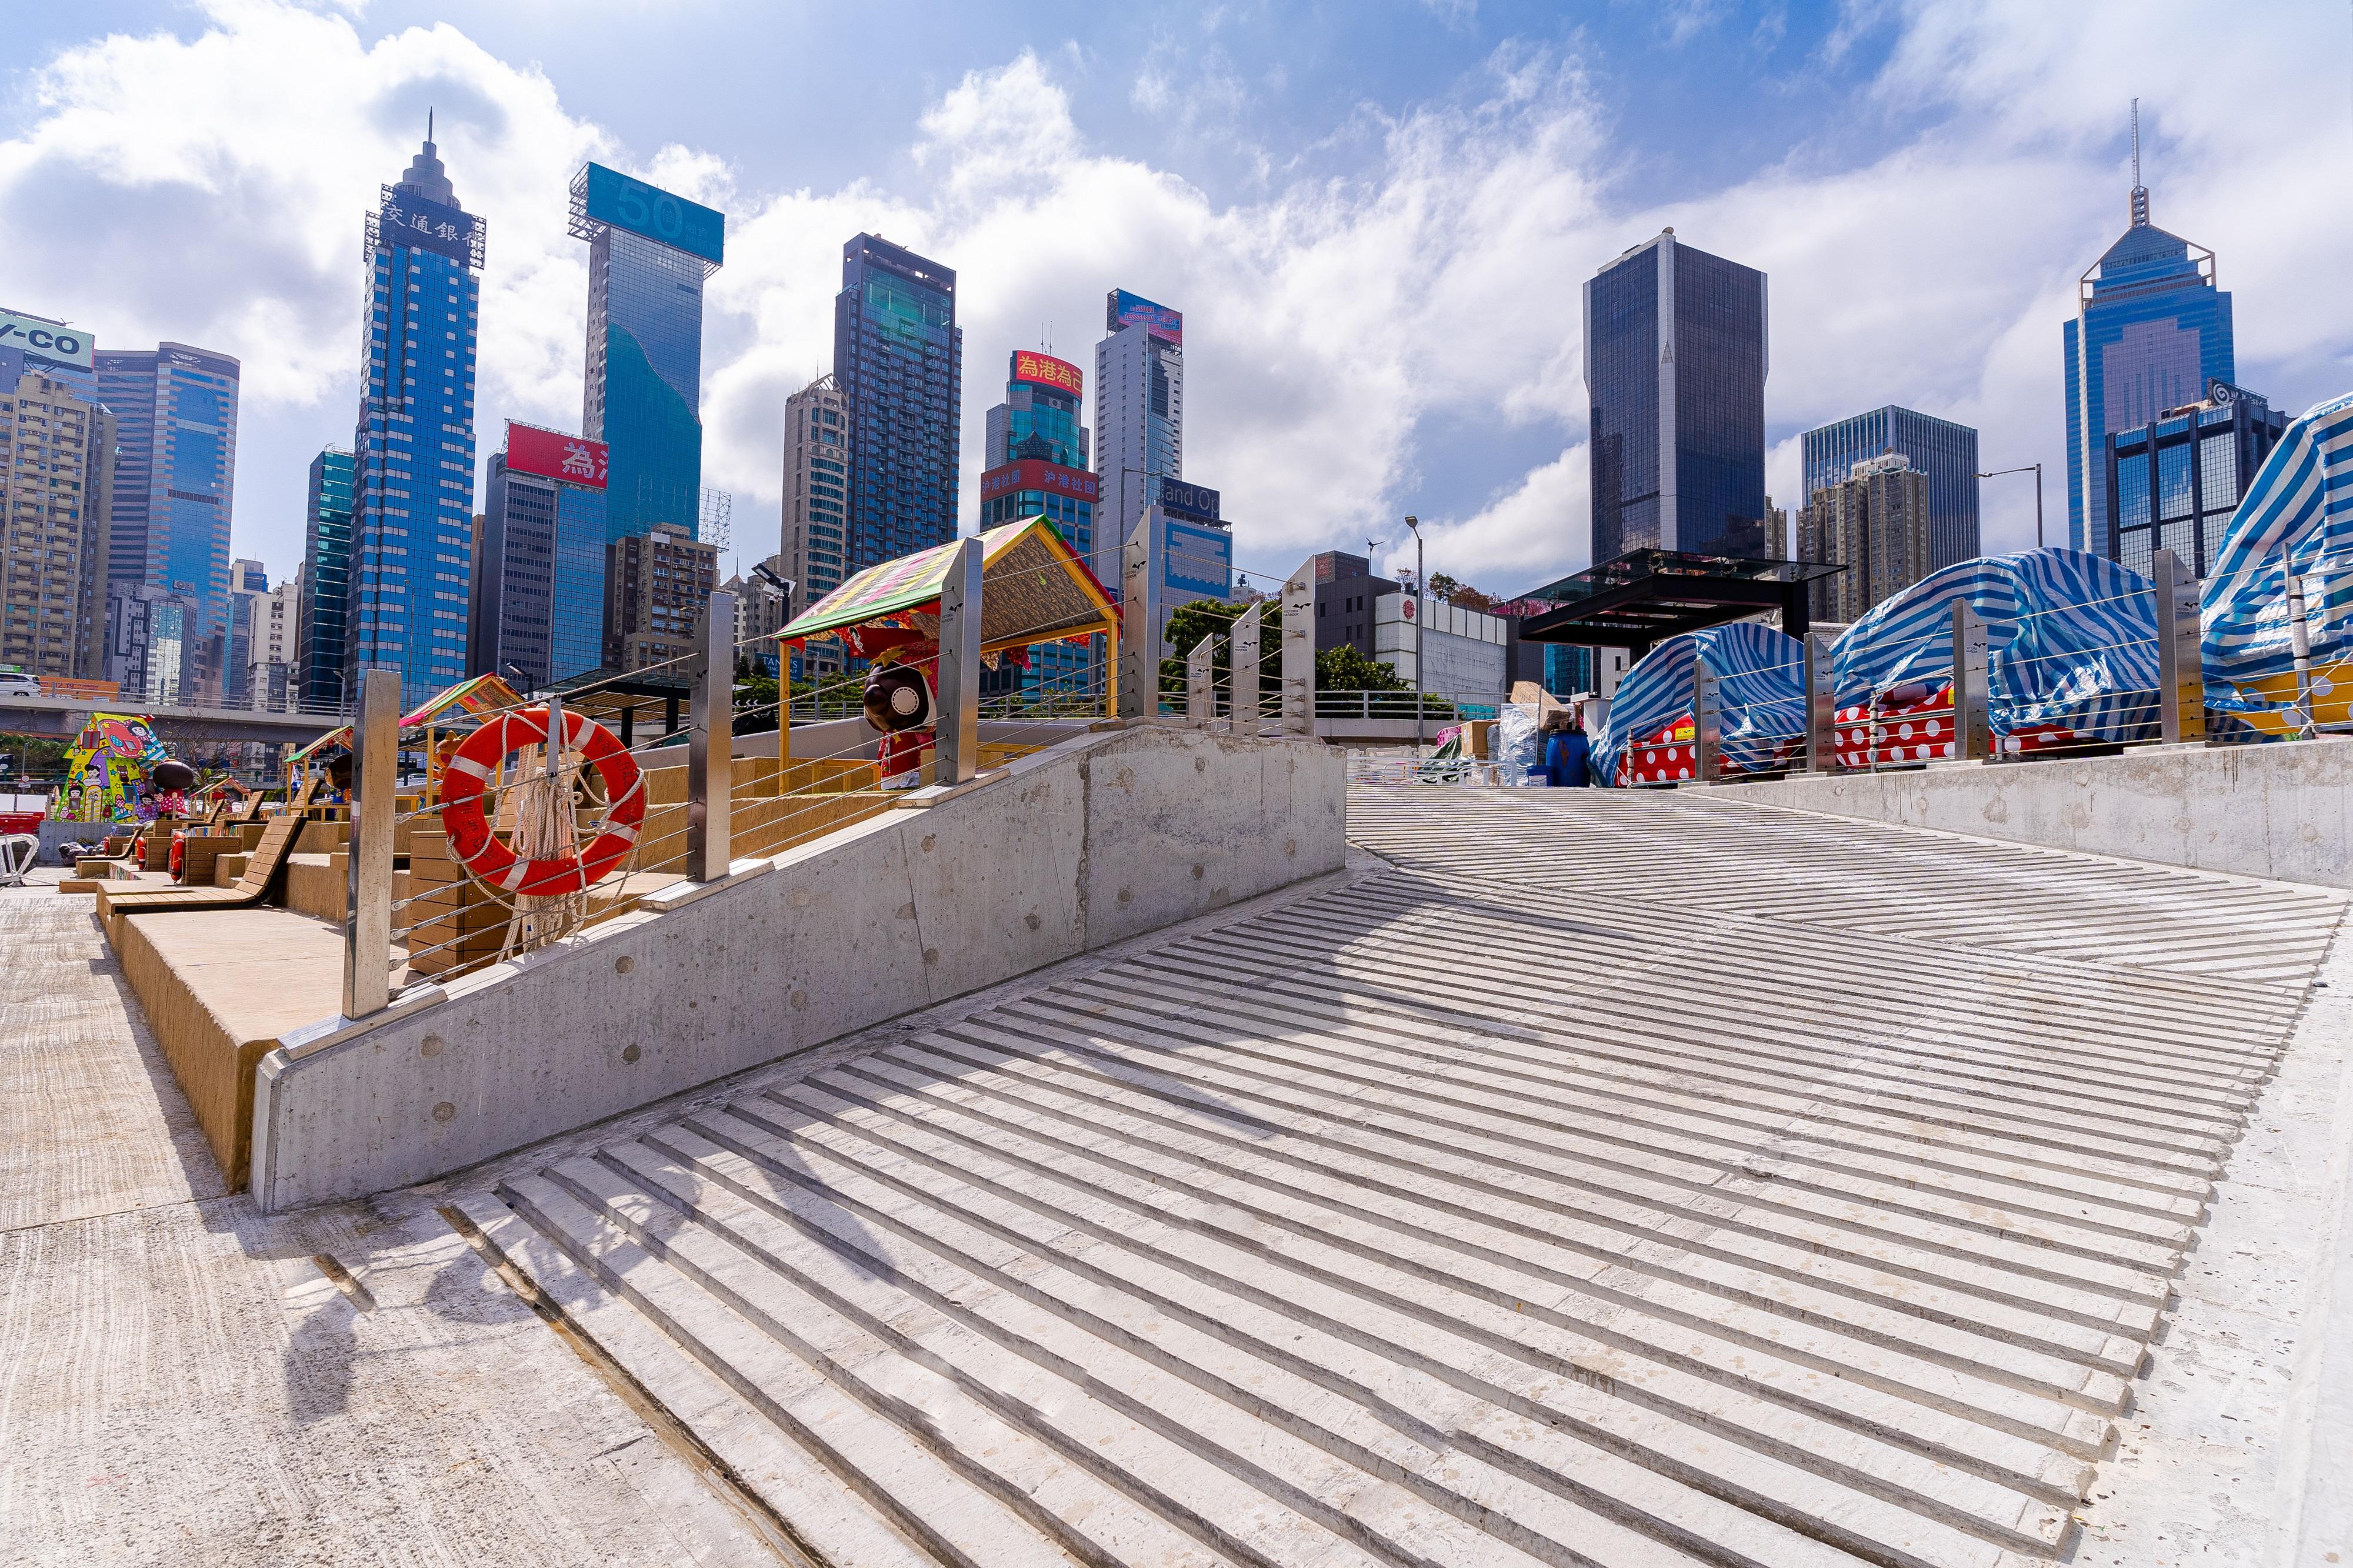 The first harbour steps in Victoria Harbour and the Water Sports and Recreation Precinct (Phase 2) located at the Wan Chai harbourfront will be officially opened on December 24. The Precinct provides an access ramp for boats to go up and down to the water in preparation for future water sport competitions.